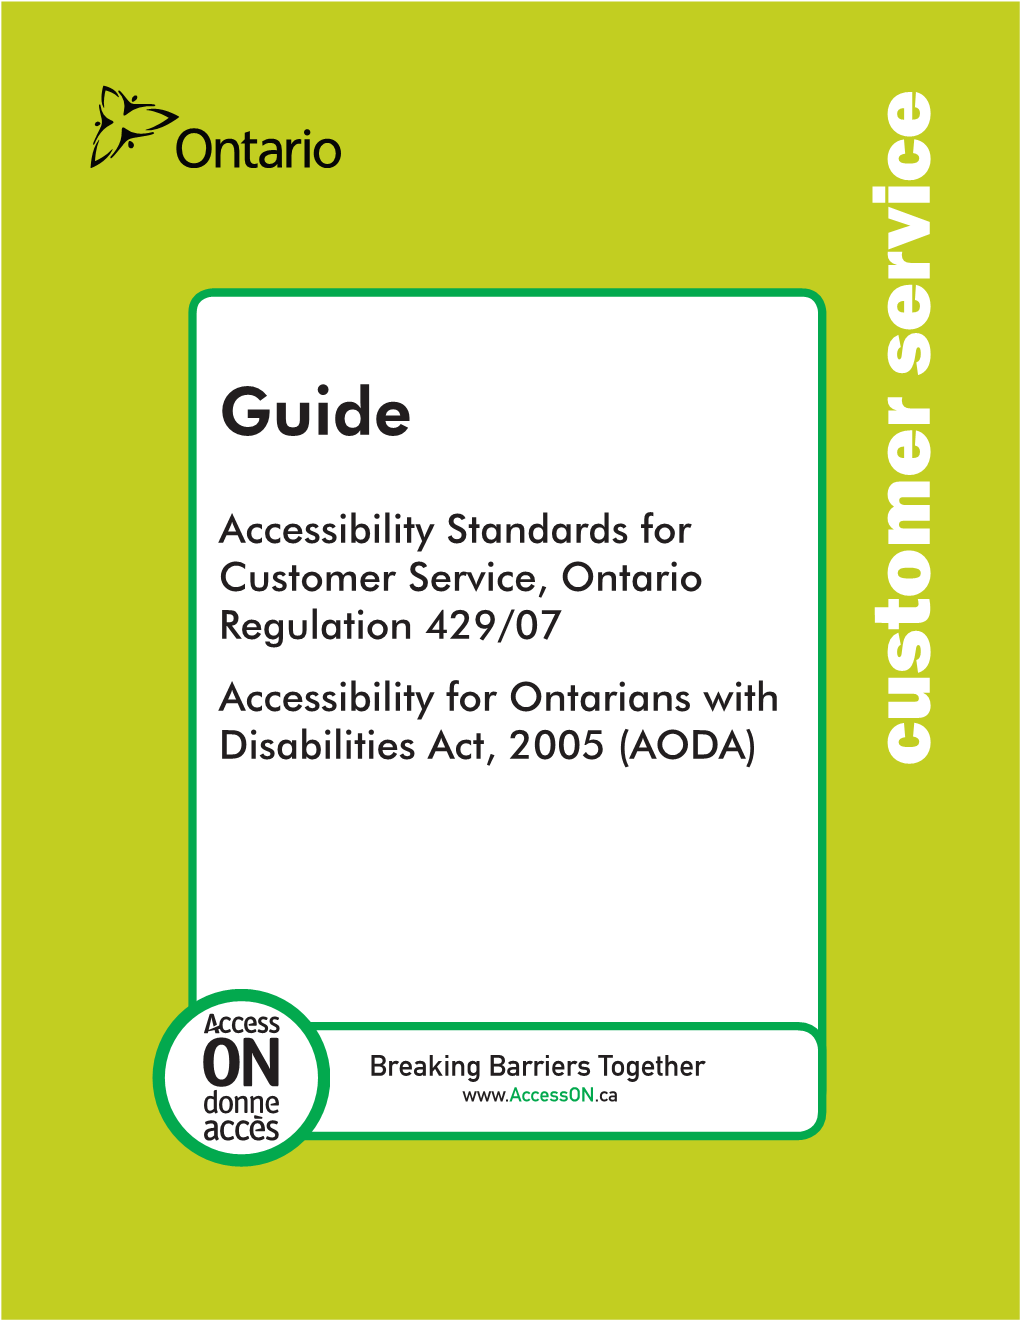 Accessibility Standards for Customer Service, Ontario Regulation Guide